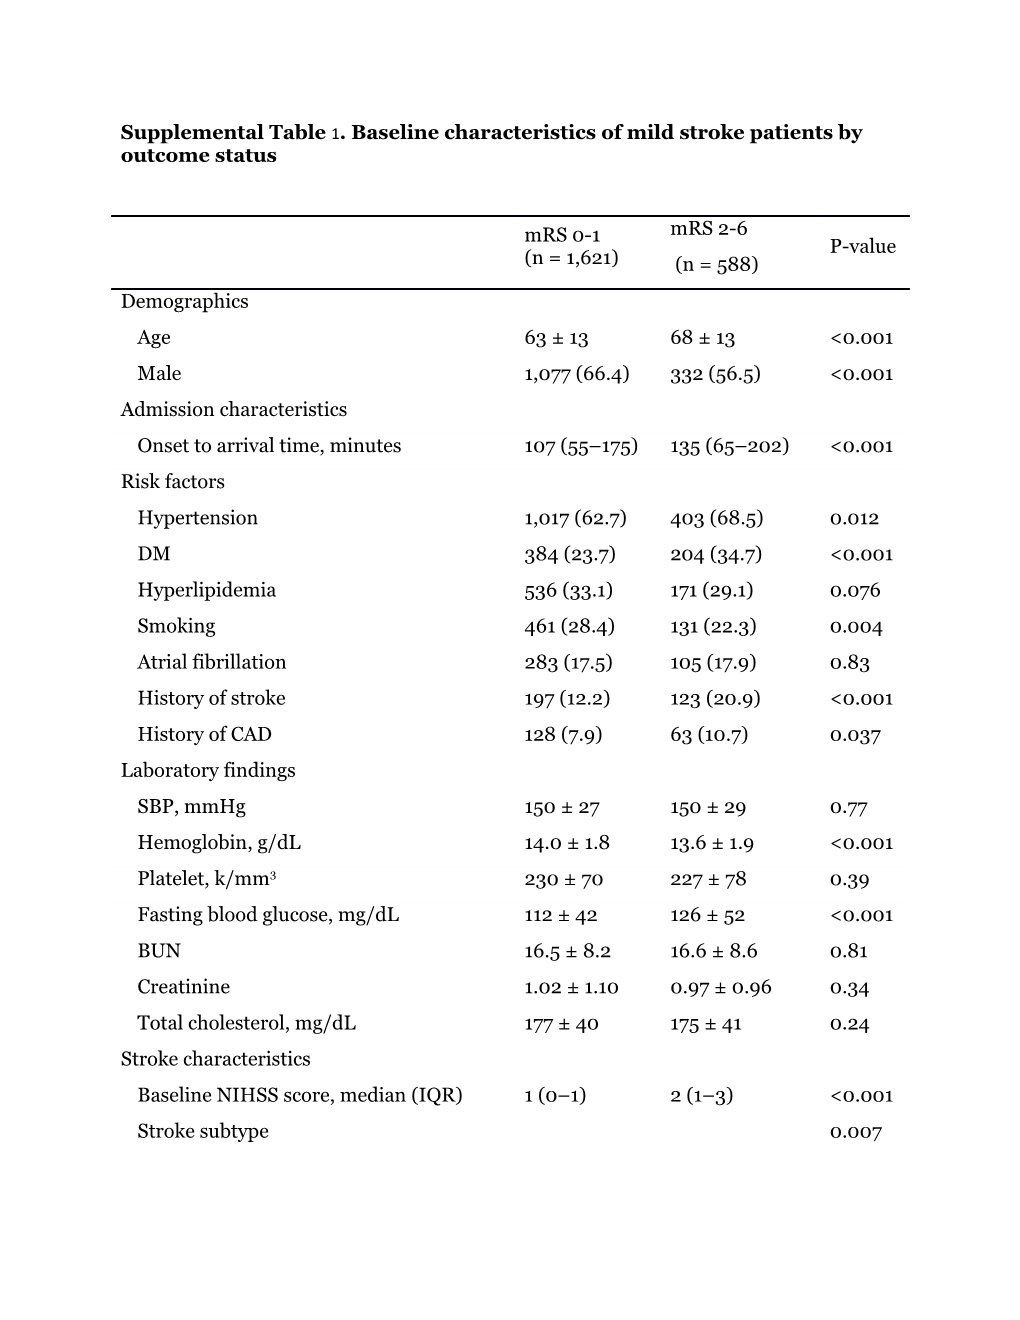 Supplemental Table 1. Baseline Characteristics of Mild Stroke Patients by Outcome Status